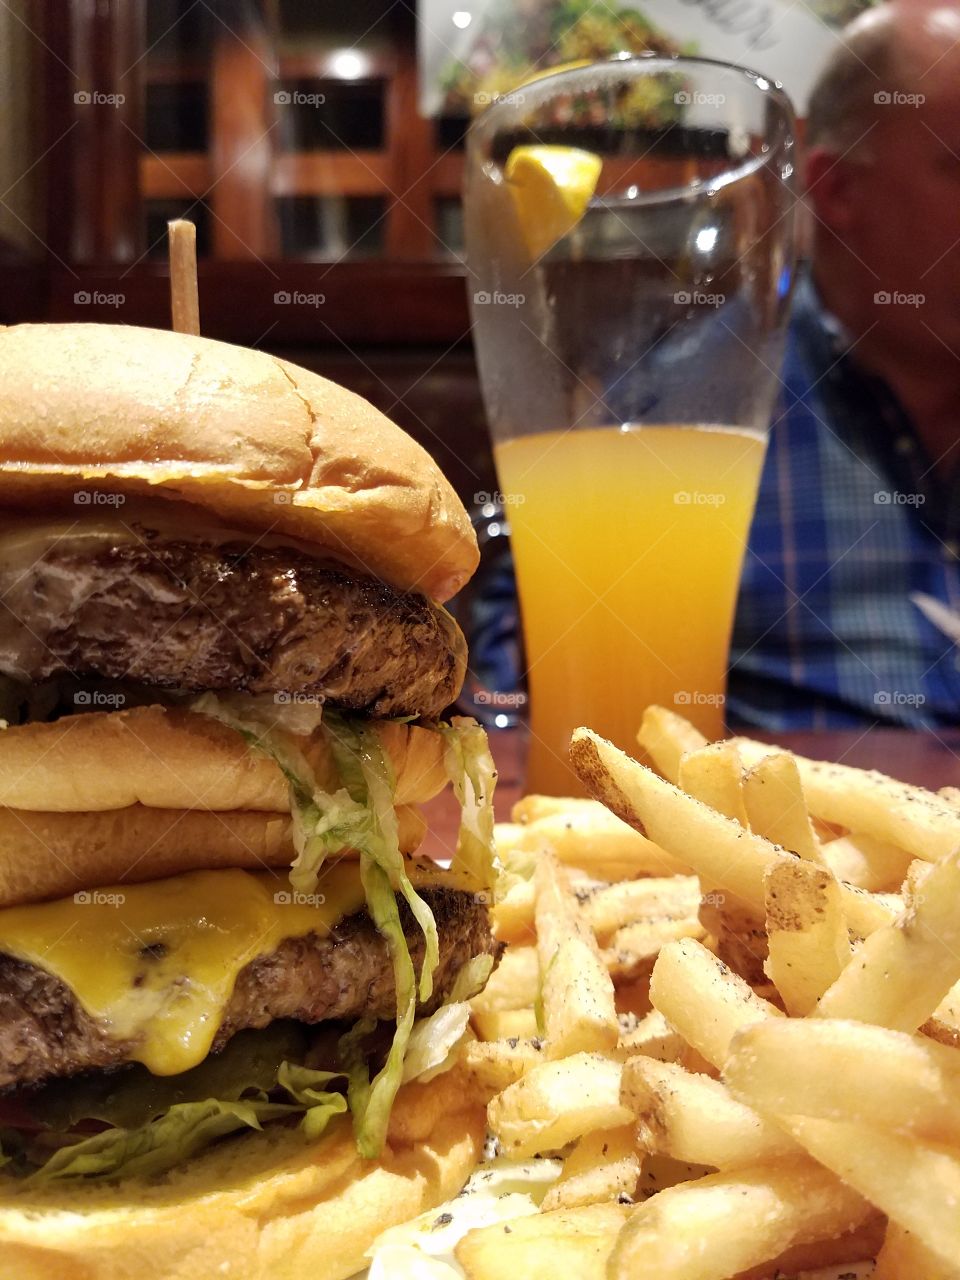 This burger was a monster